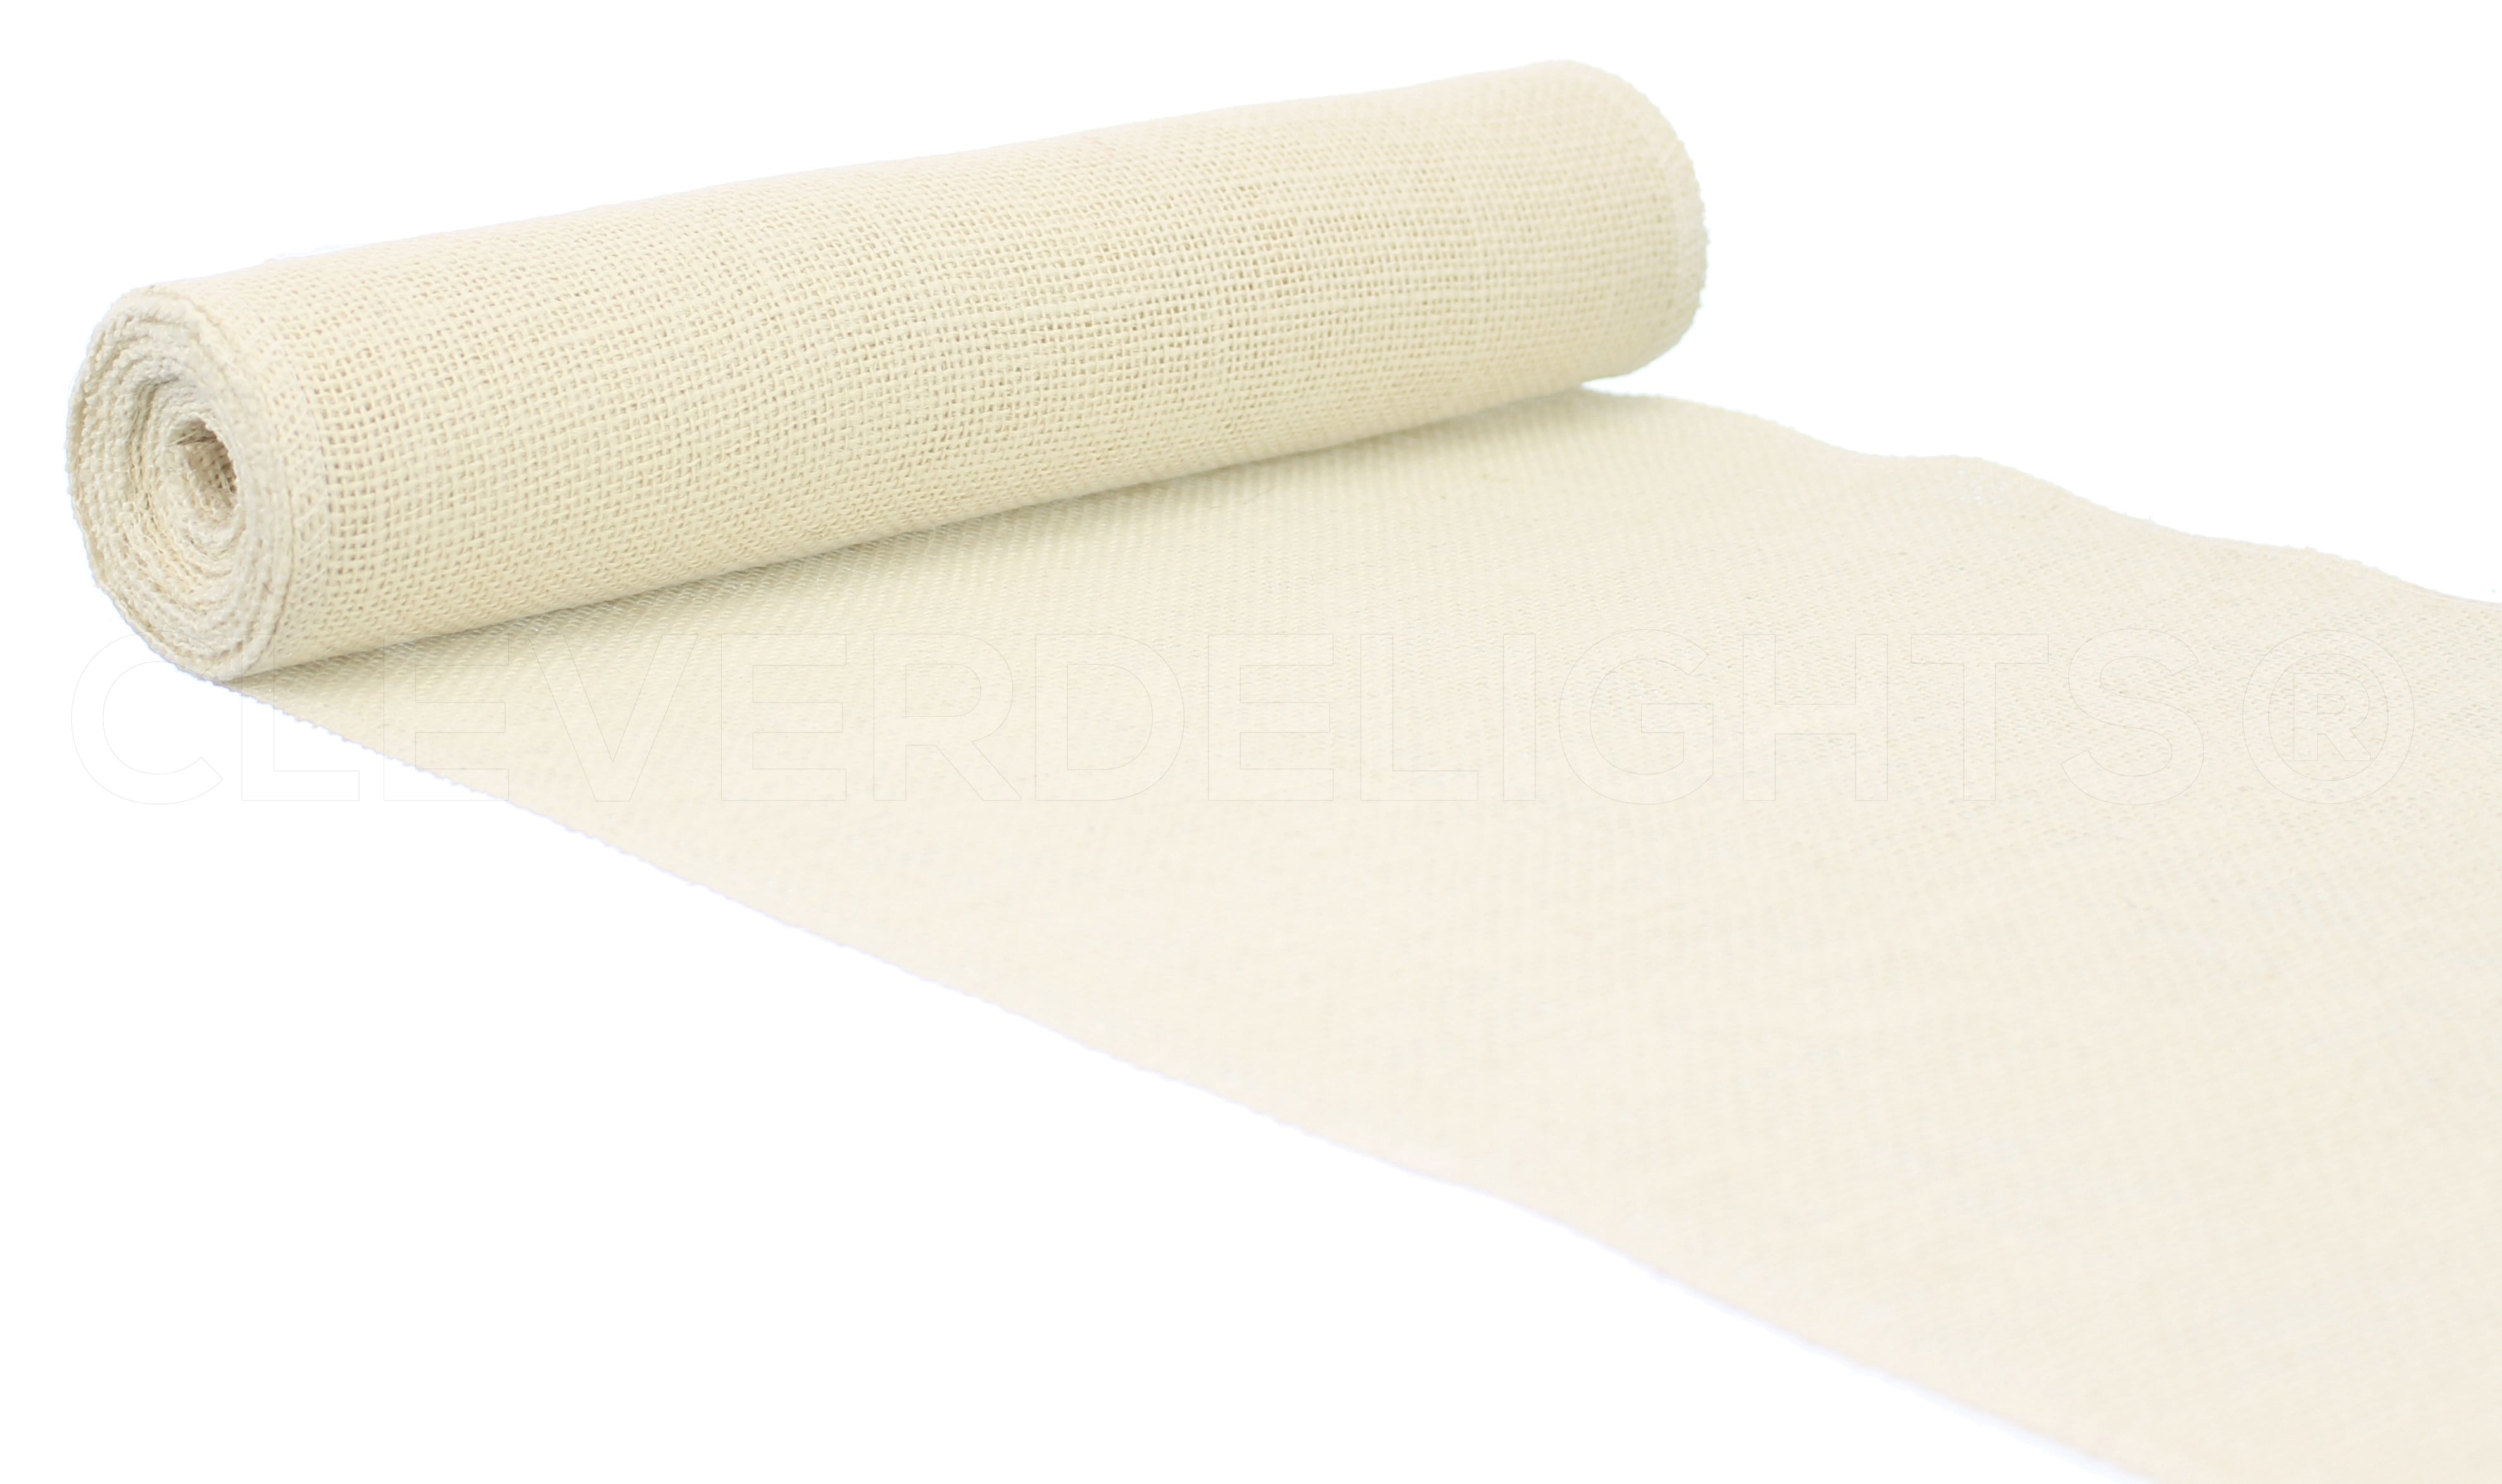 CleverDelights 12 Premium Burlap Roll - 50 Yards - No-Fray Finished Edges  - Natural Jute Burlap Fabric